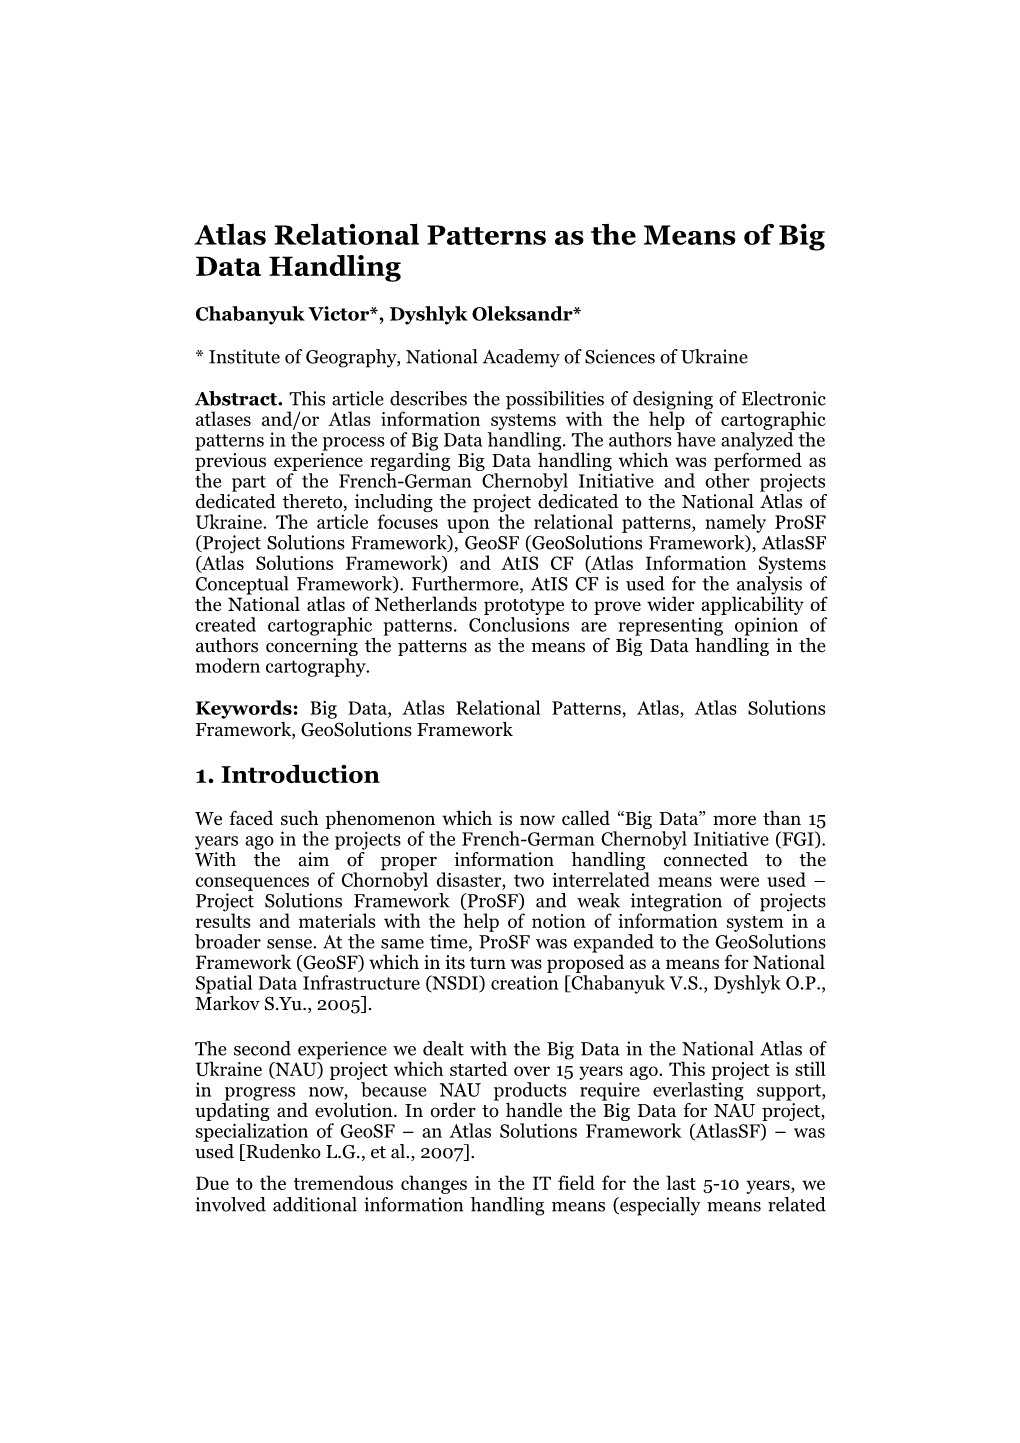 Atlas Relational Patterns As the Means of Big Data Handling